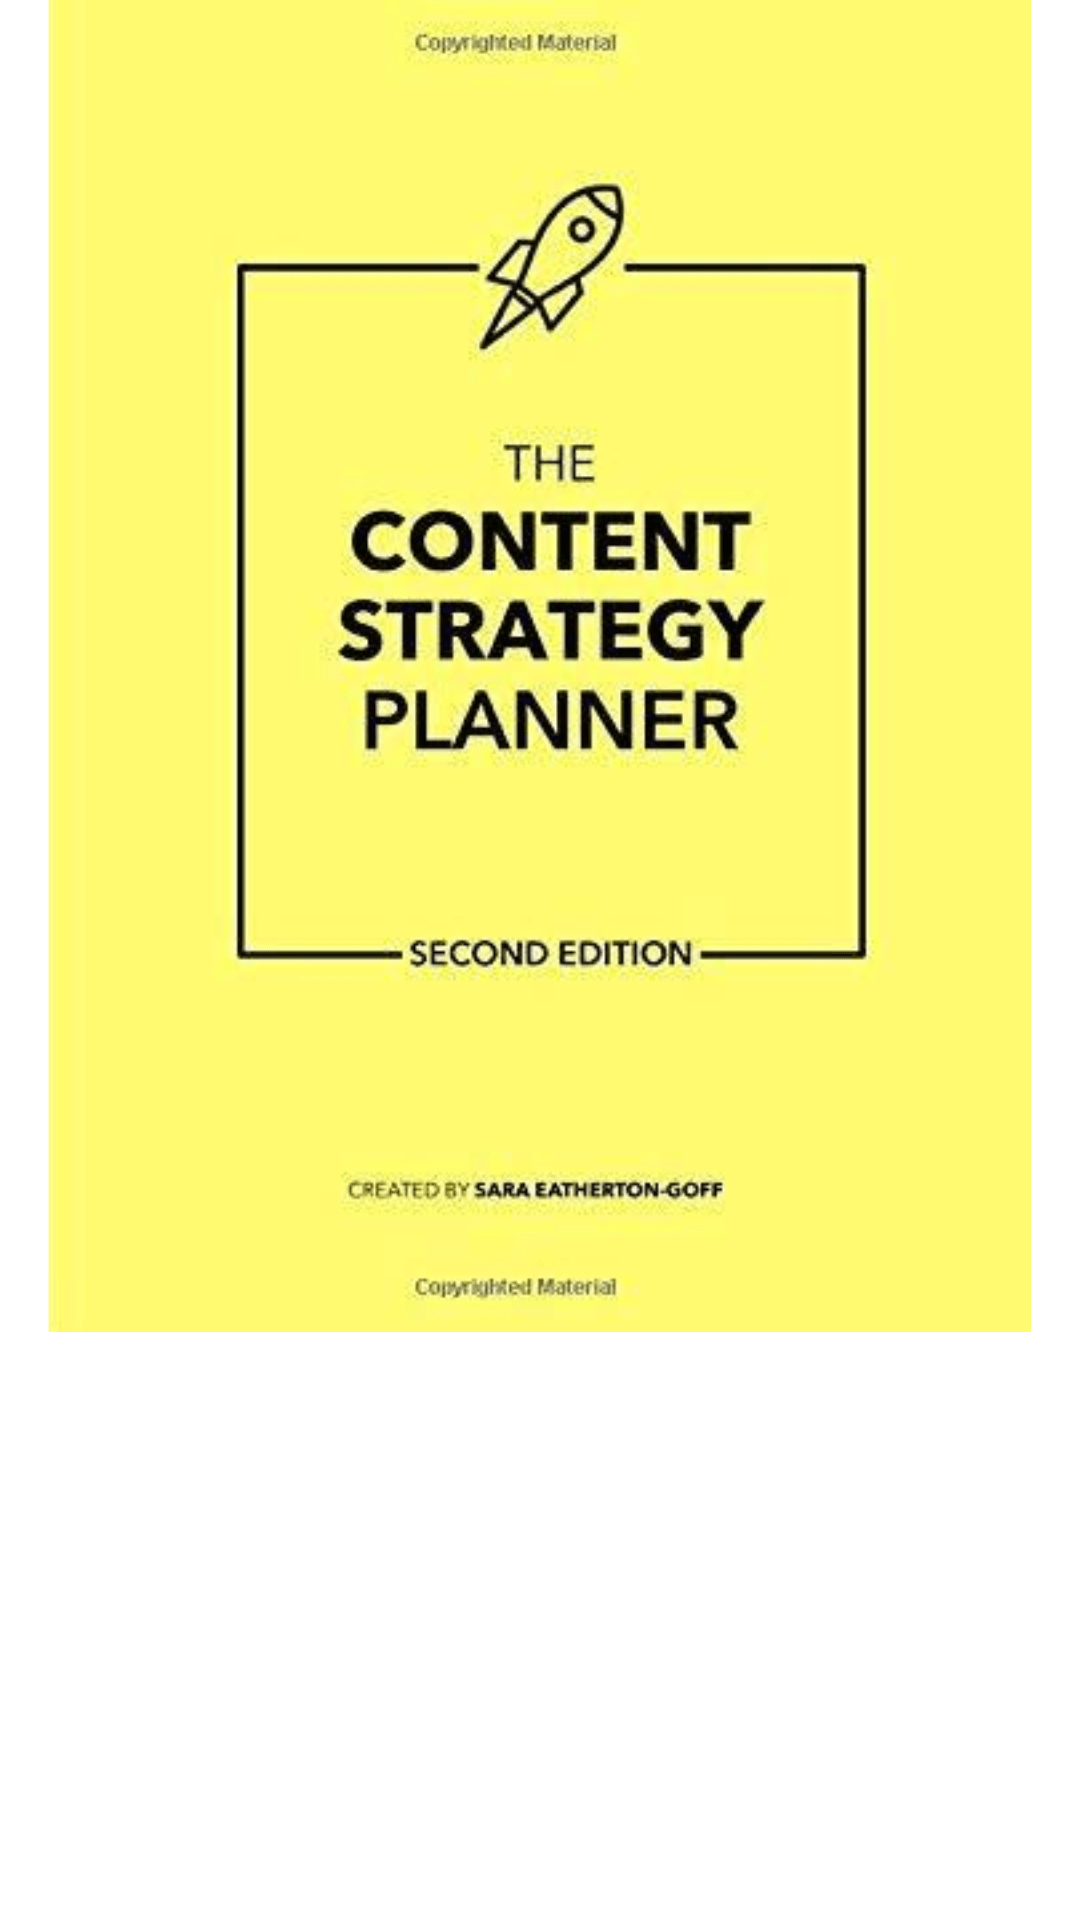 Content Strategy Planner